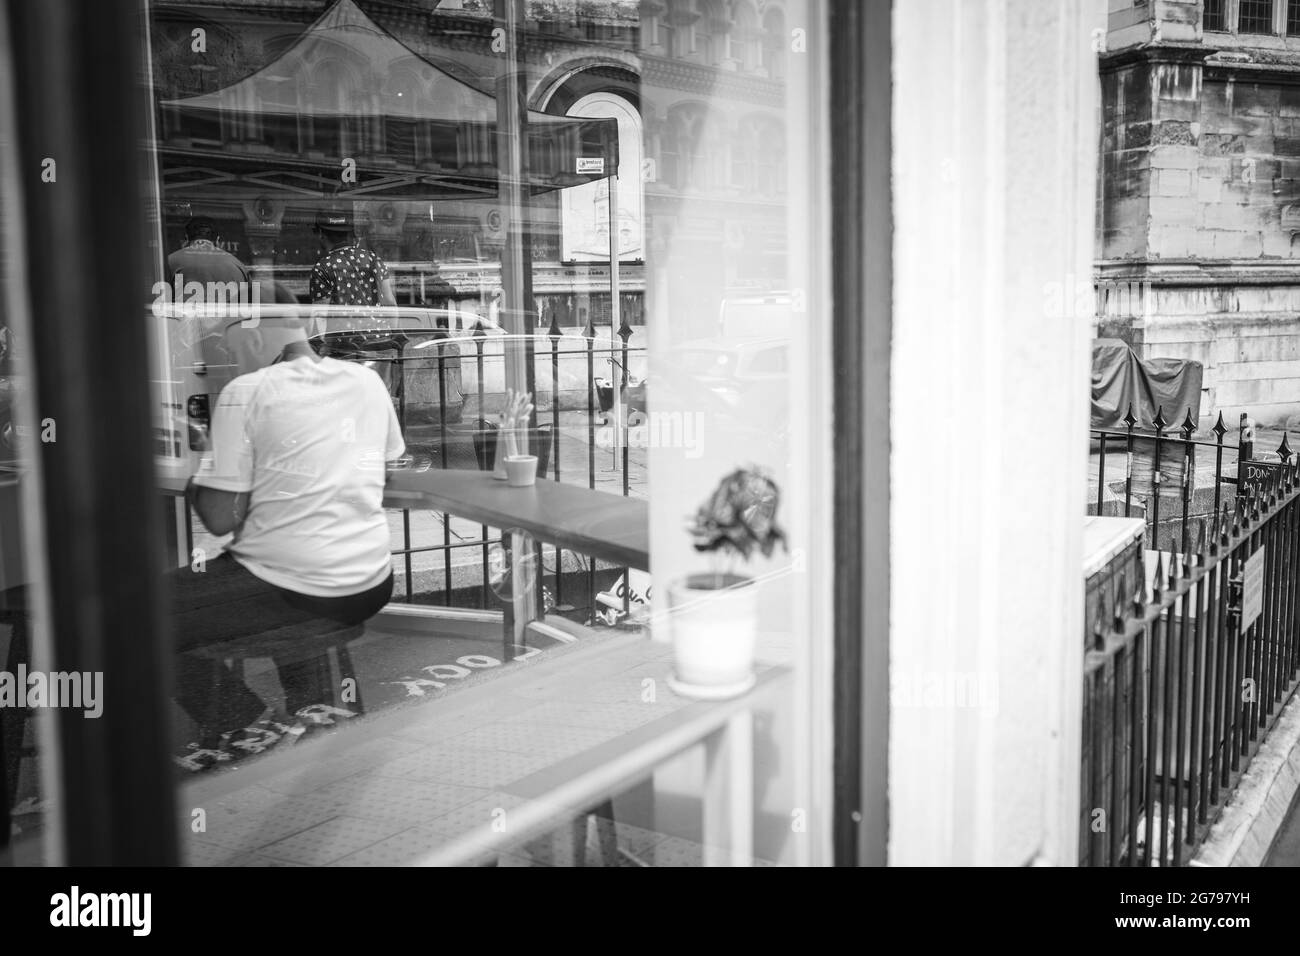 Man in window in cafe Stock Photo